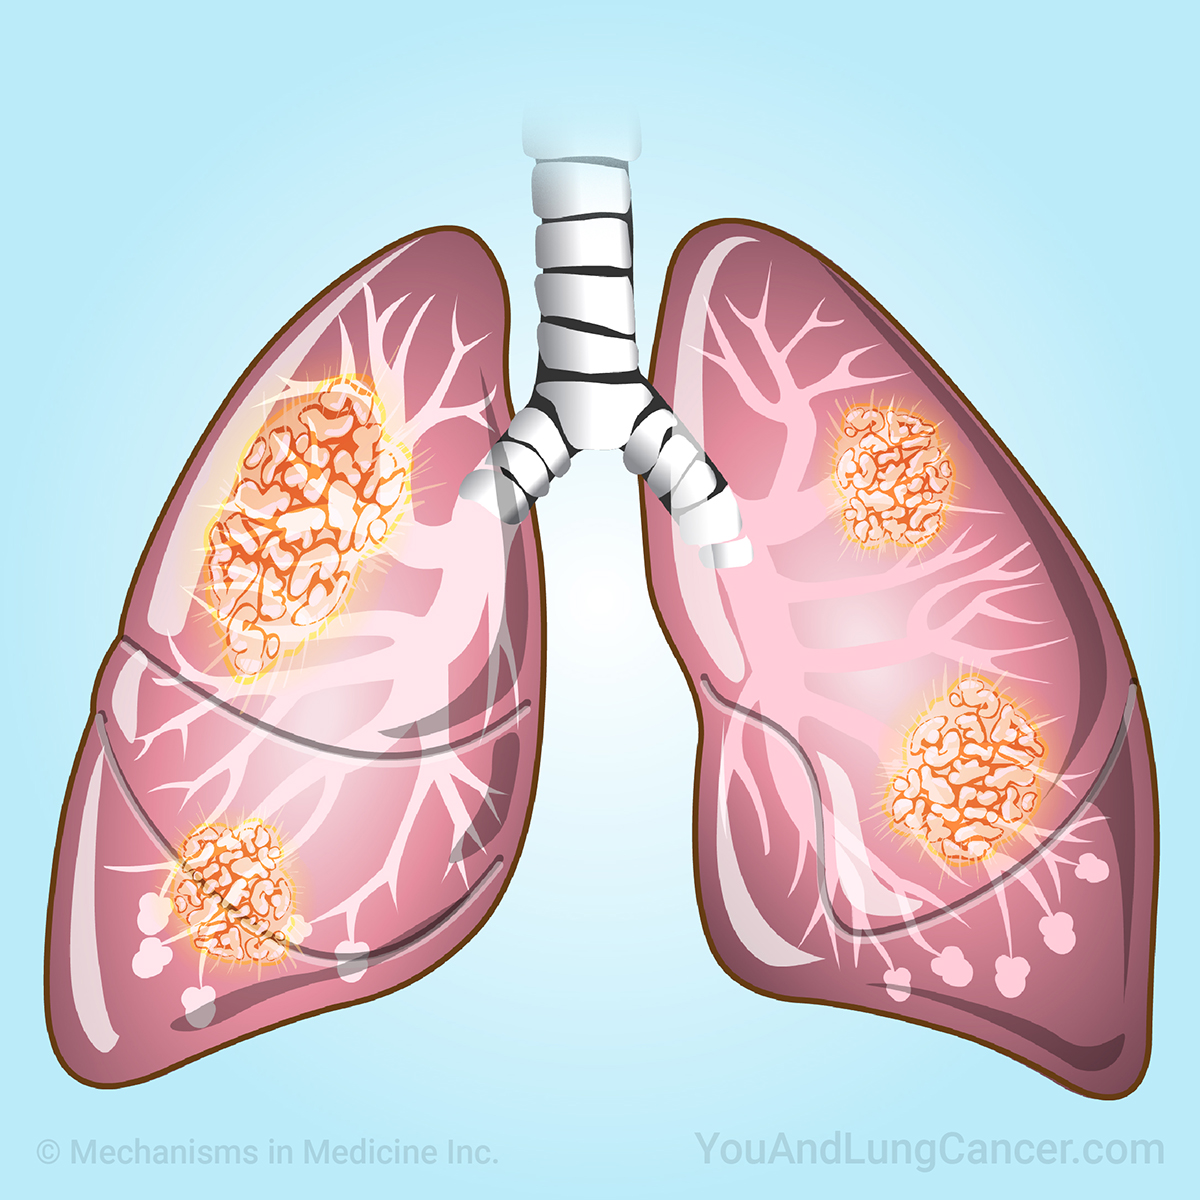 Learn about a variety of topics on lung cancer through short animations